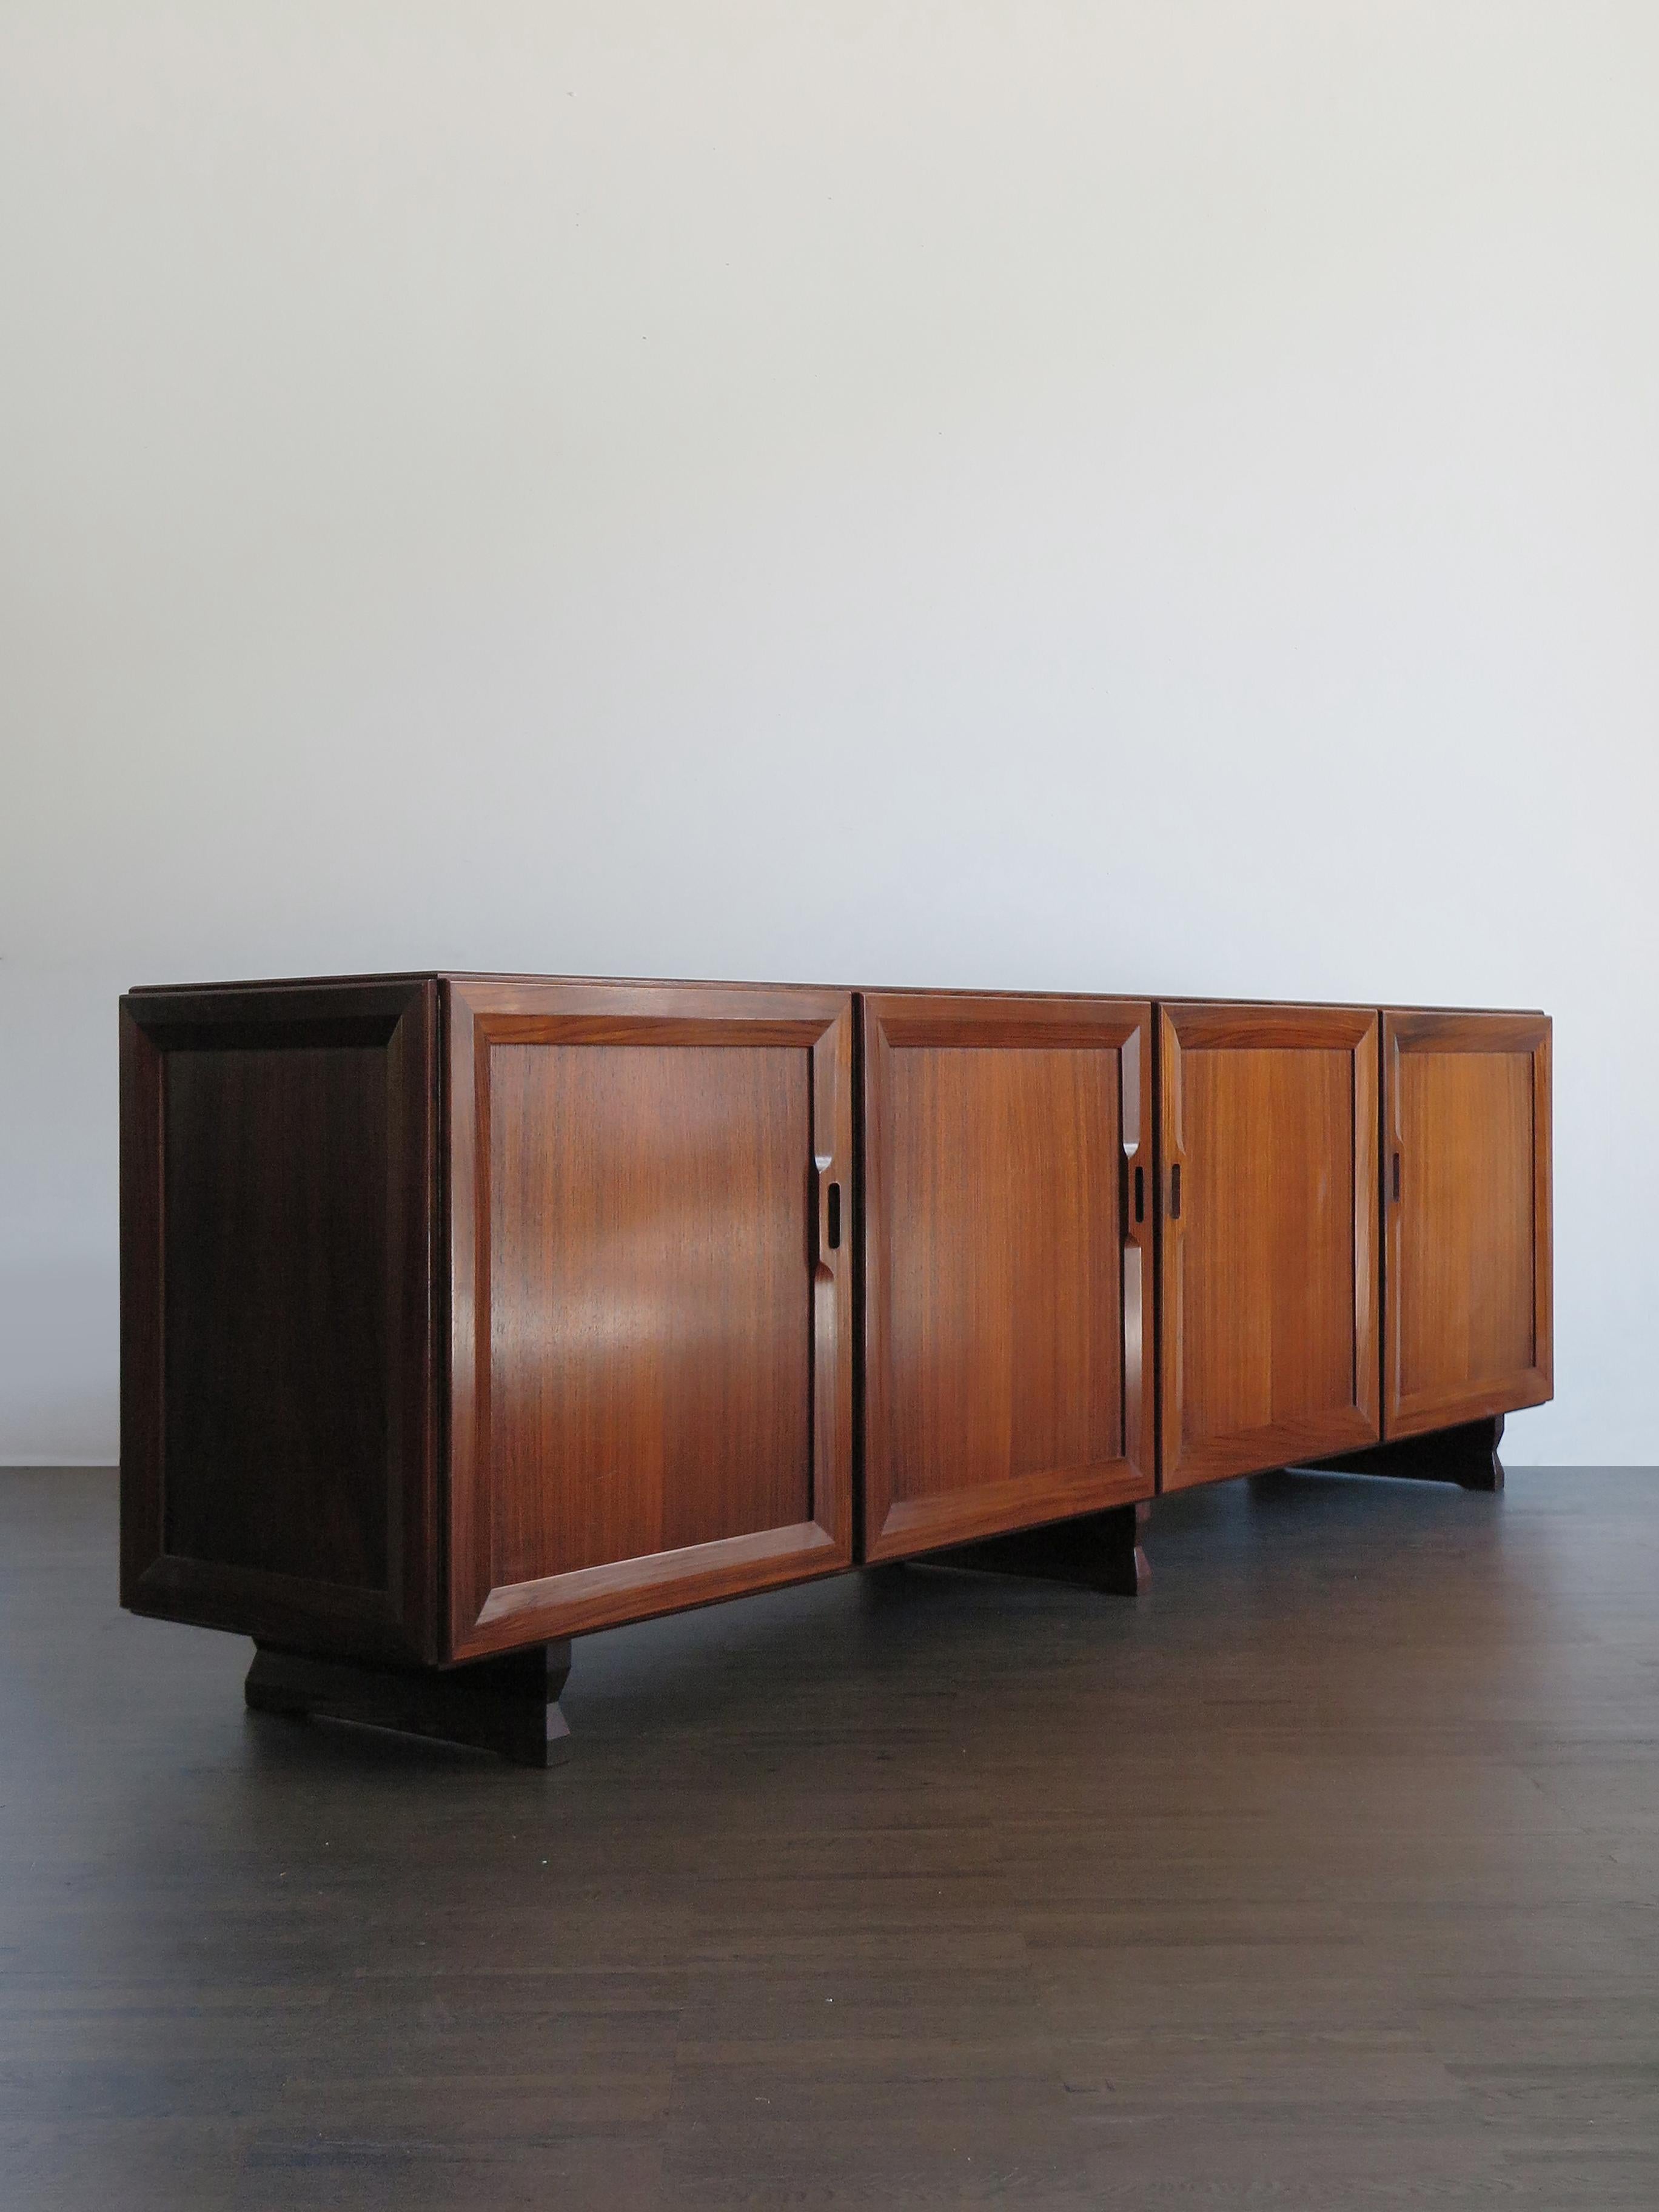 Italian rare and famous dark wood sideboard model MB15 designed by Franco Albini and produced by Poggi Pavia from 1950.
Wood veneer; feet, door frames and details in solid wood, 1950s

Bibliography:
G. Gramigna, Italian Design 1950 - 2000, Vol